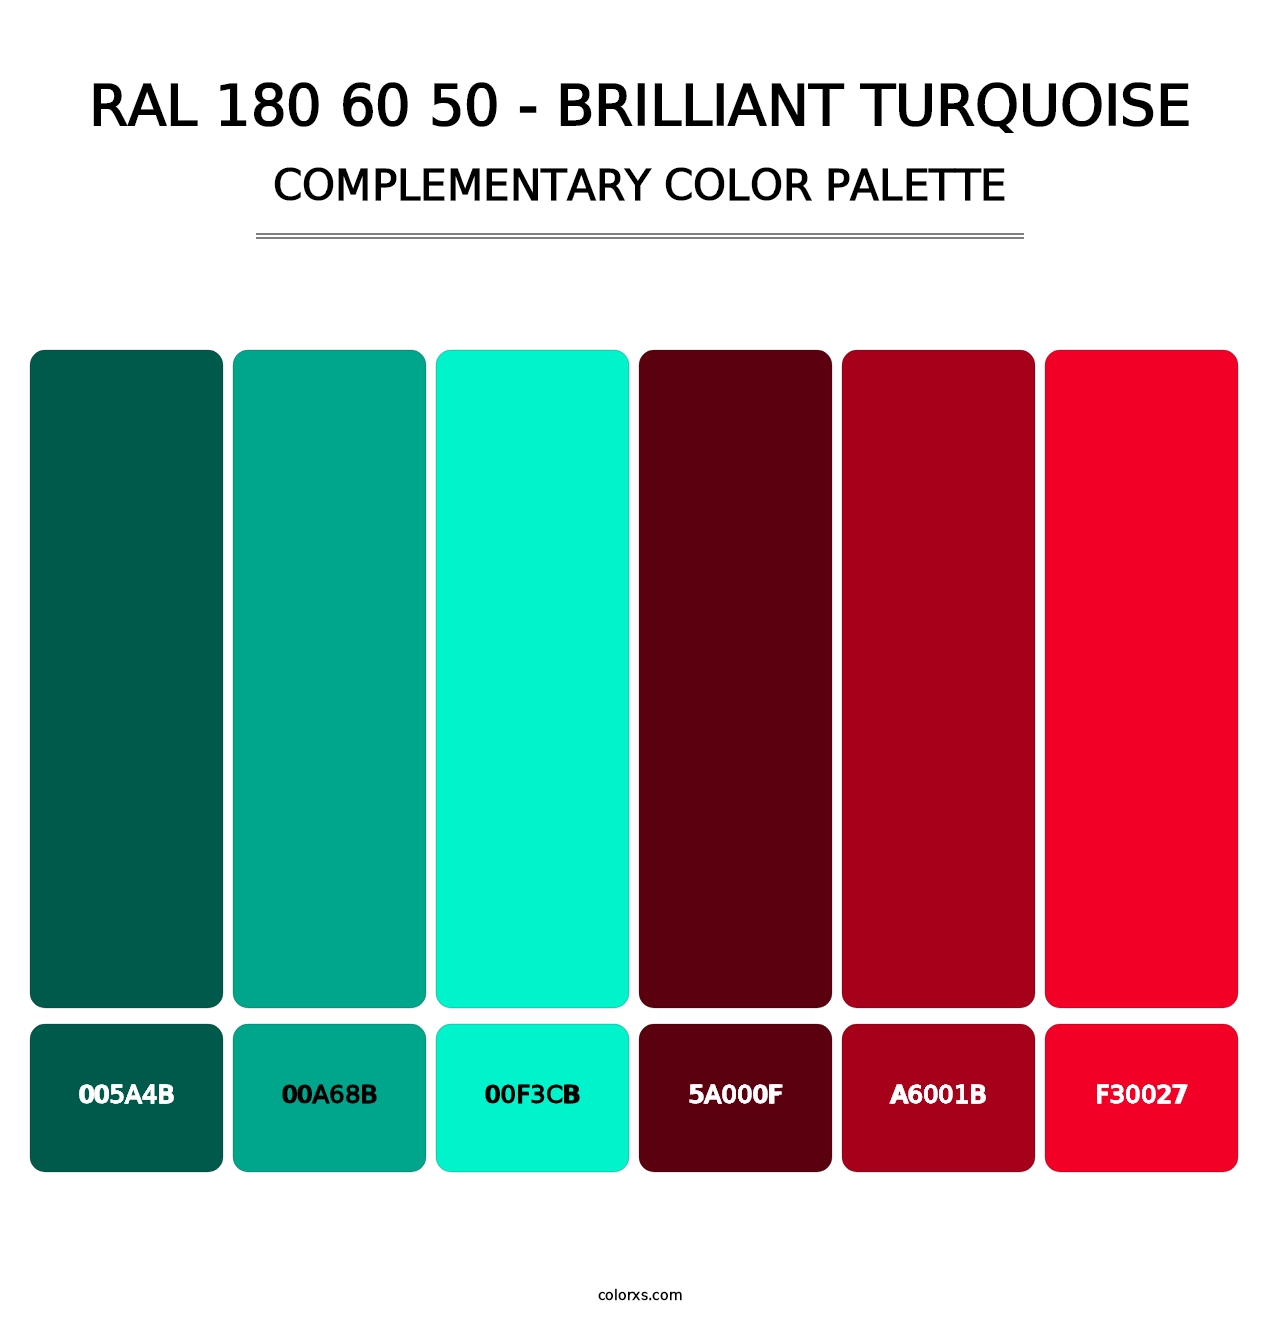 RAL 180 60 50 - Brilliant Turquoise - Complementary Color Palette